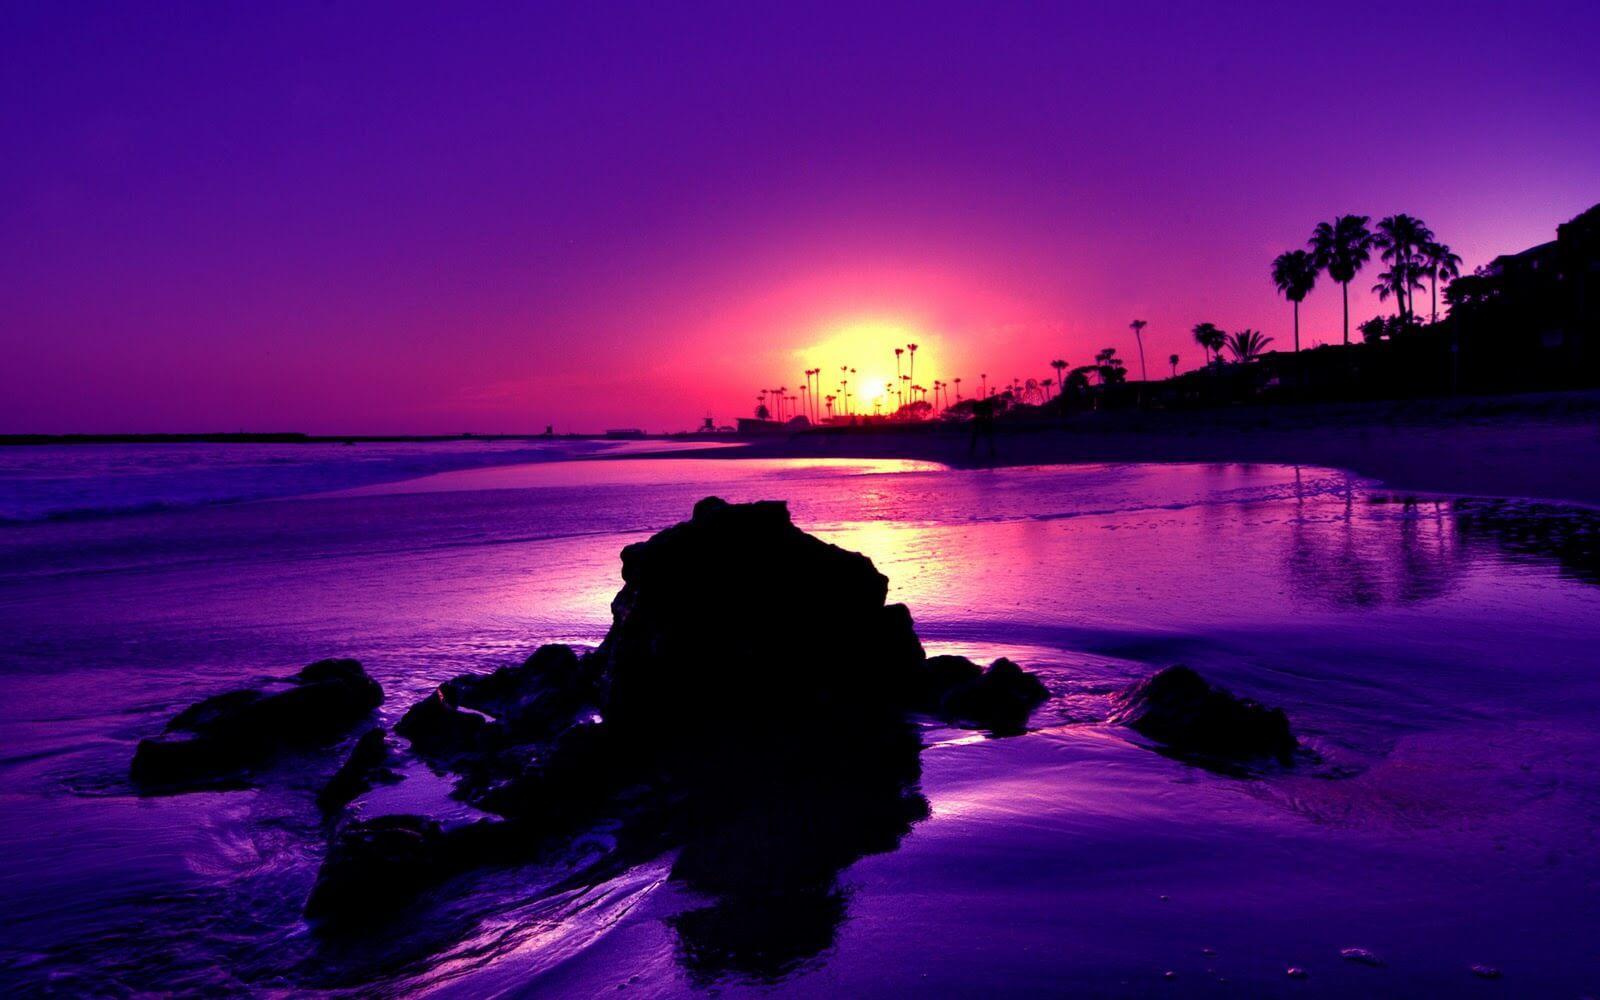 Live Sunset Wallpaper for Android - APK Download